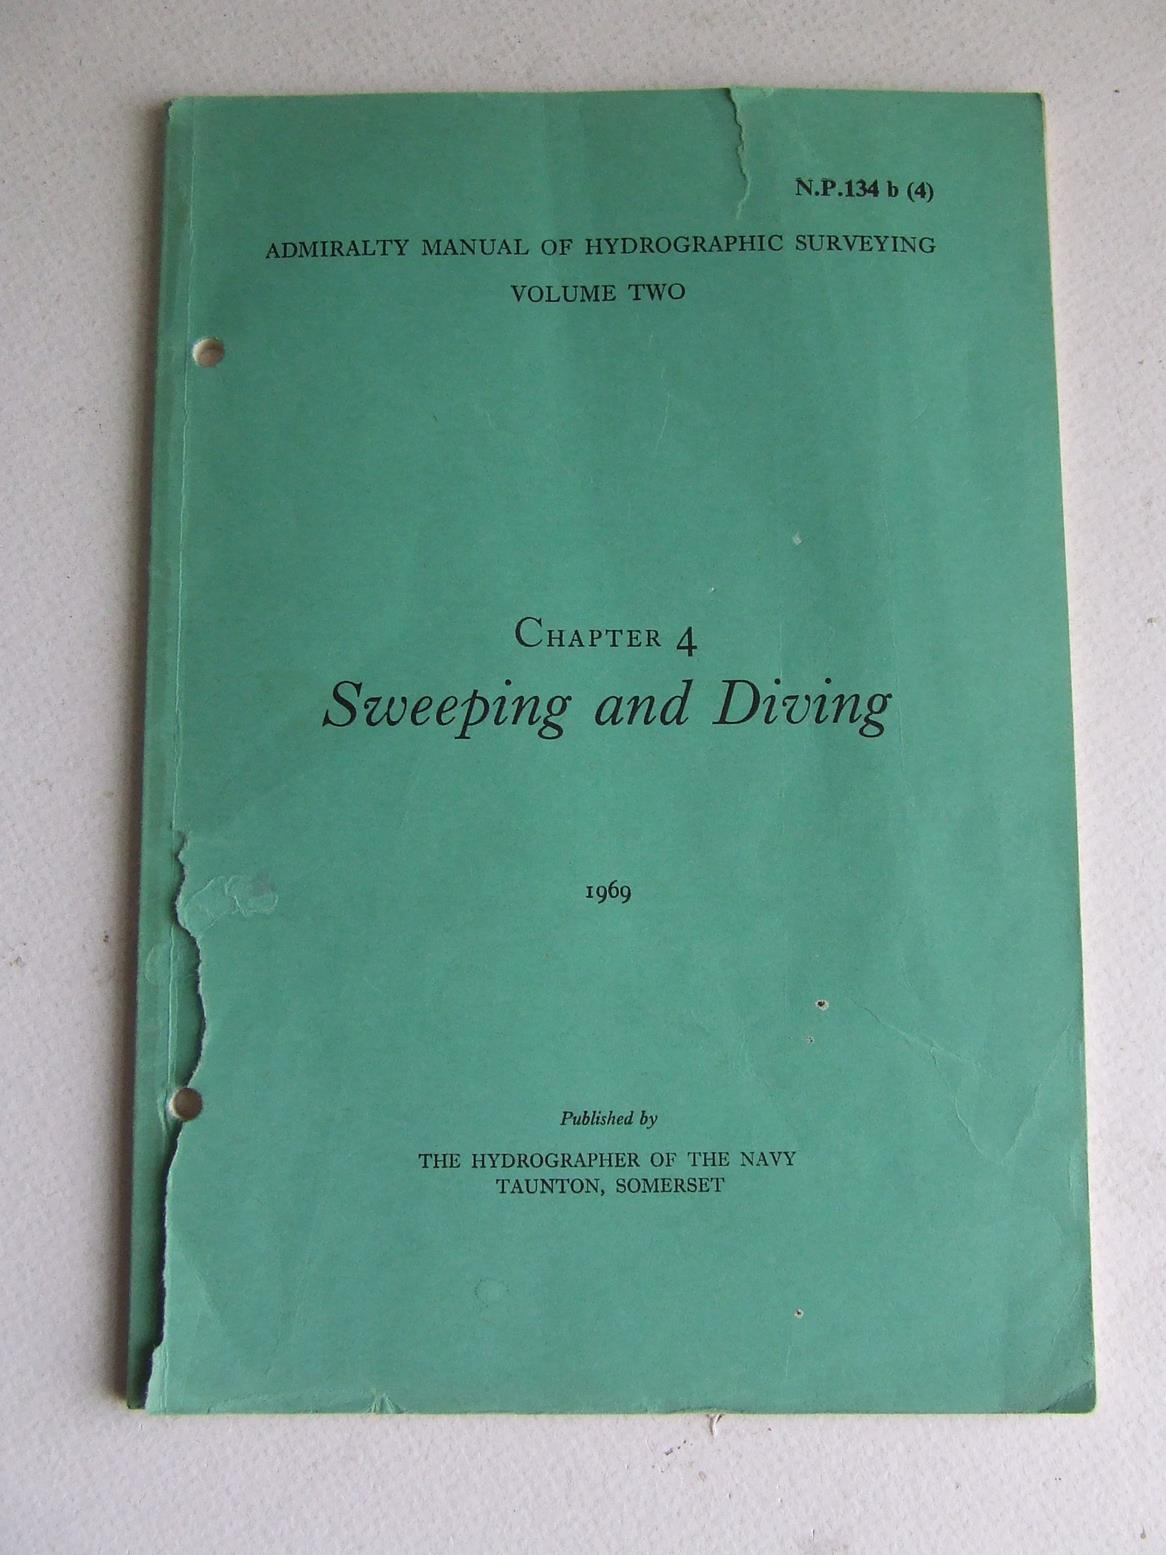 Admiralty Manual of Hydrographic Surveying